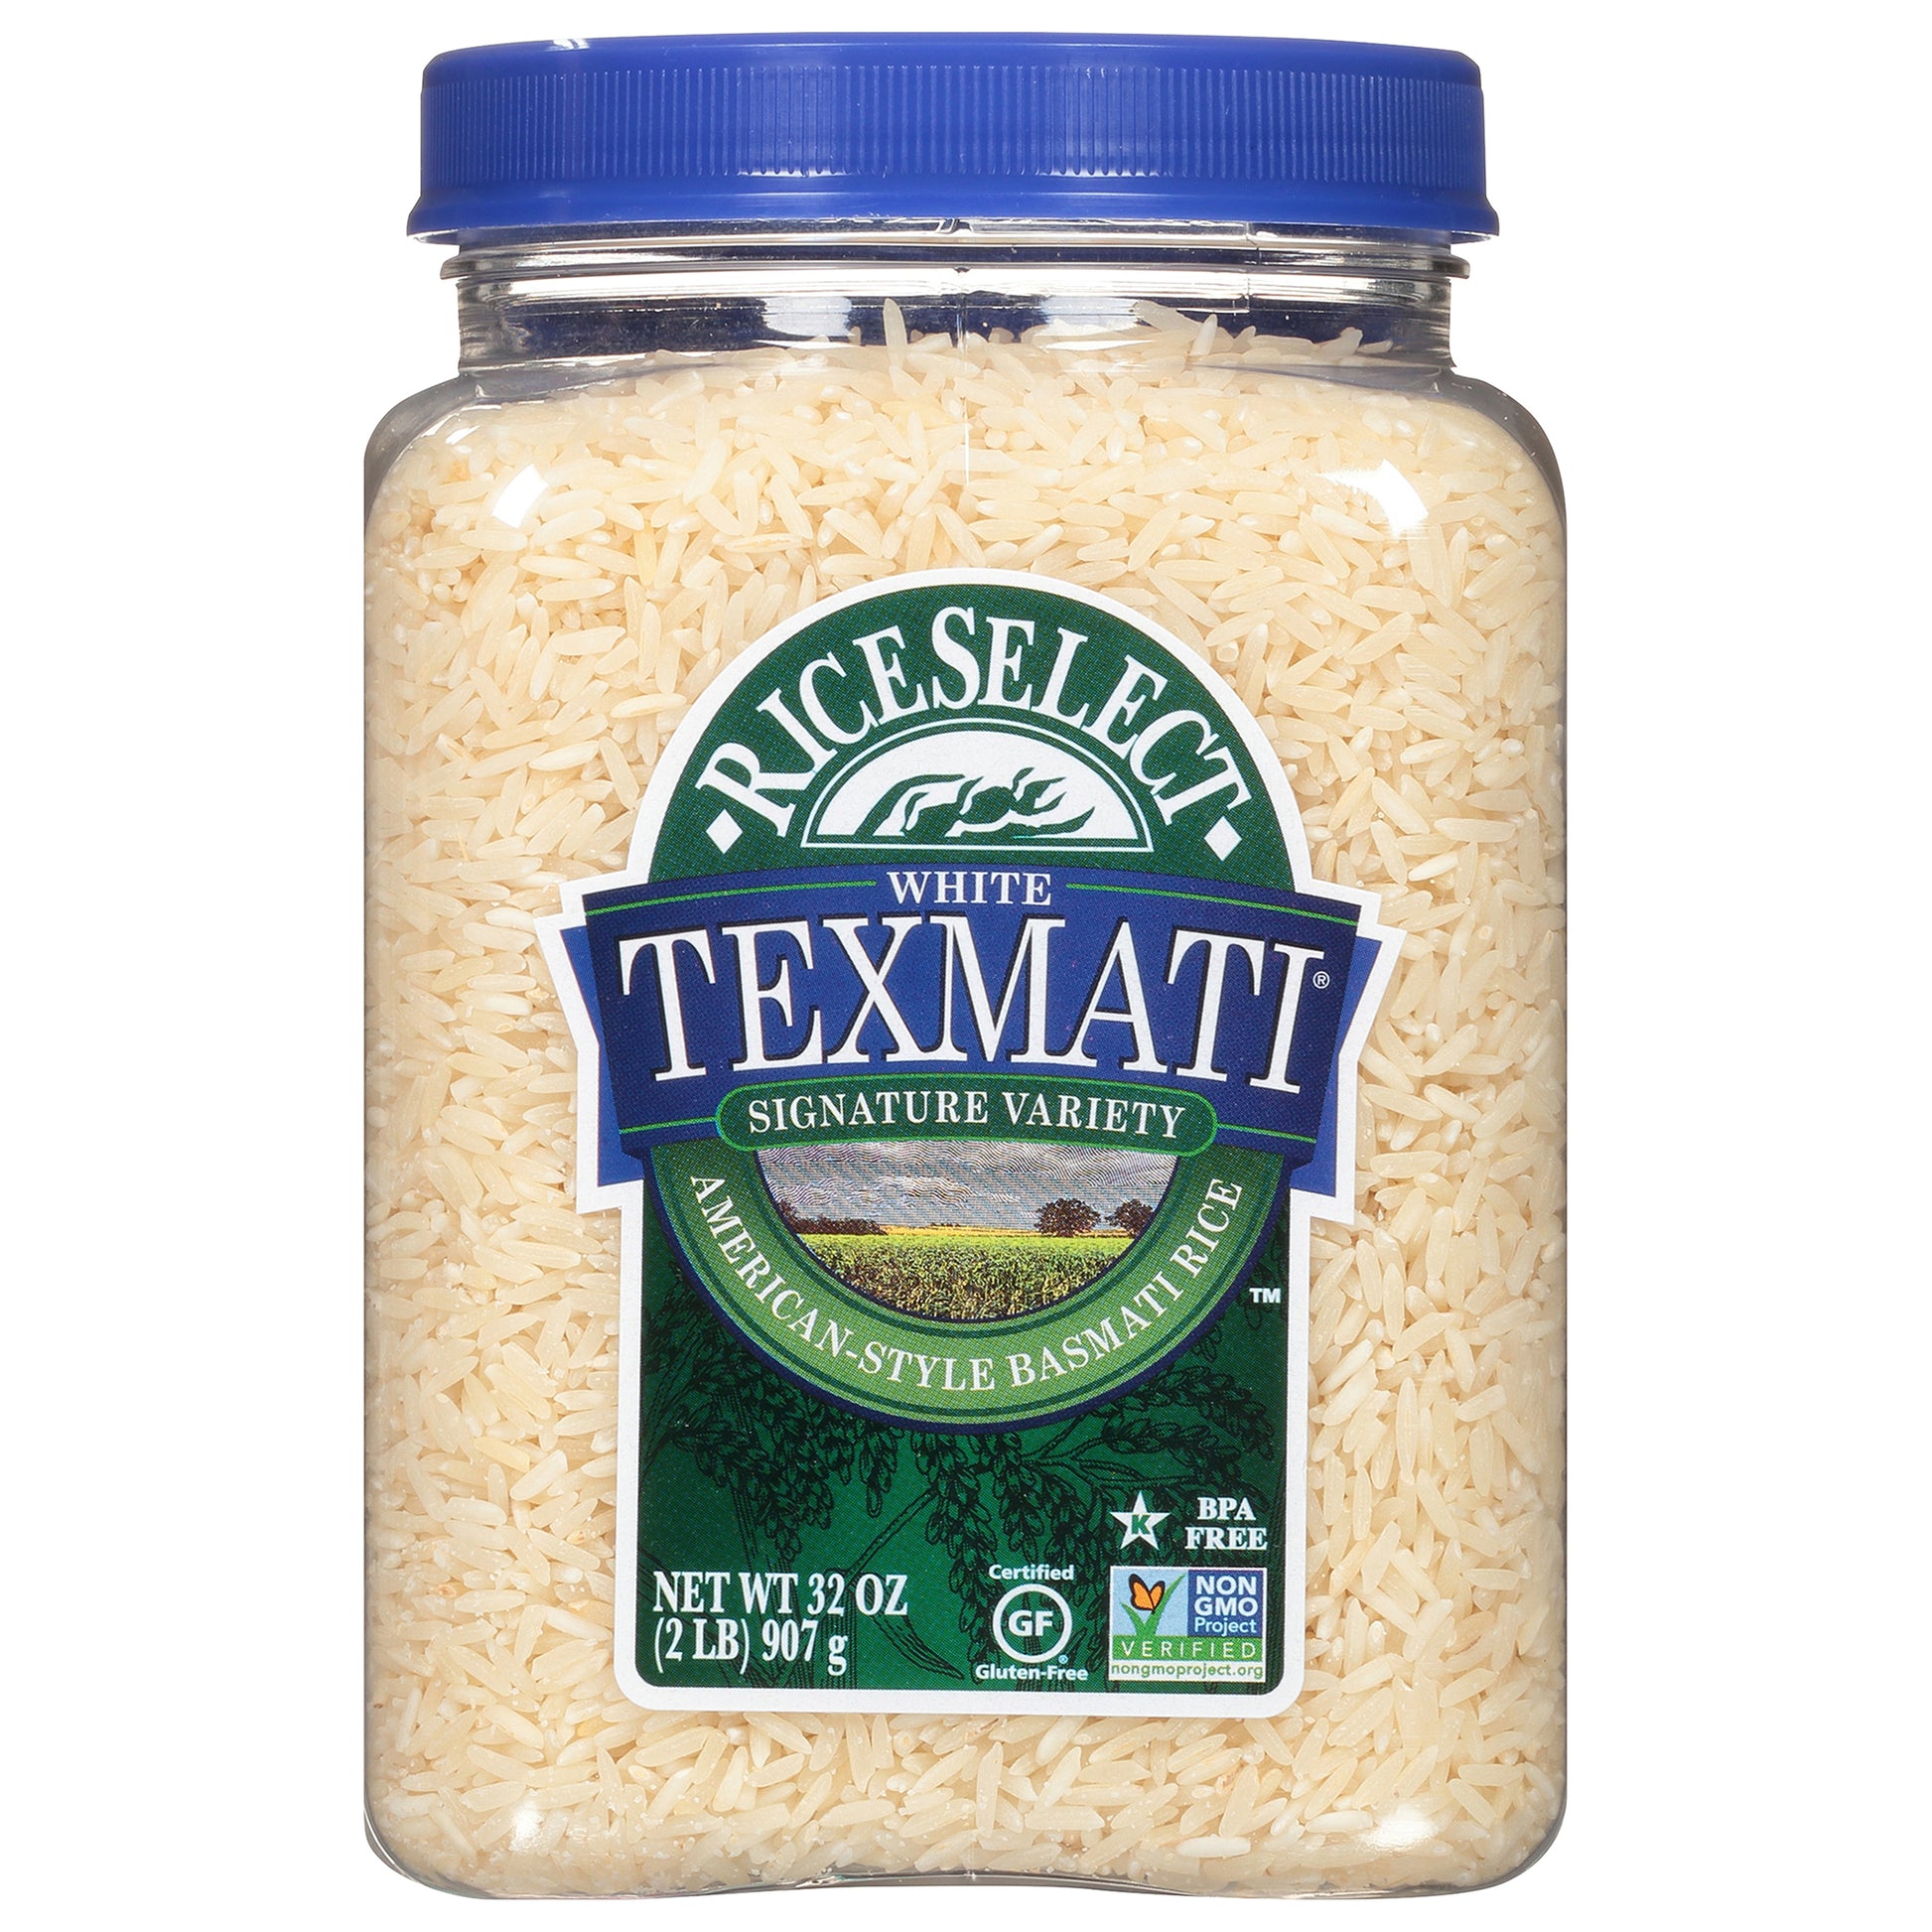 Riceselect Rice Texmati White 32 oz (Pack Of 4)